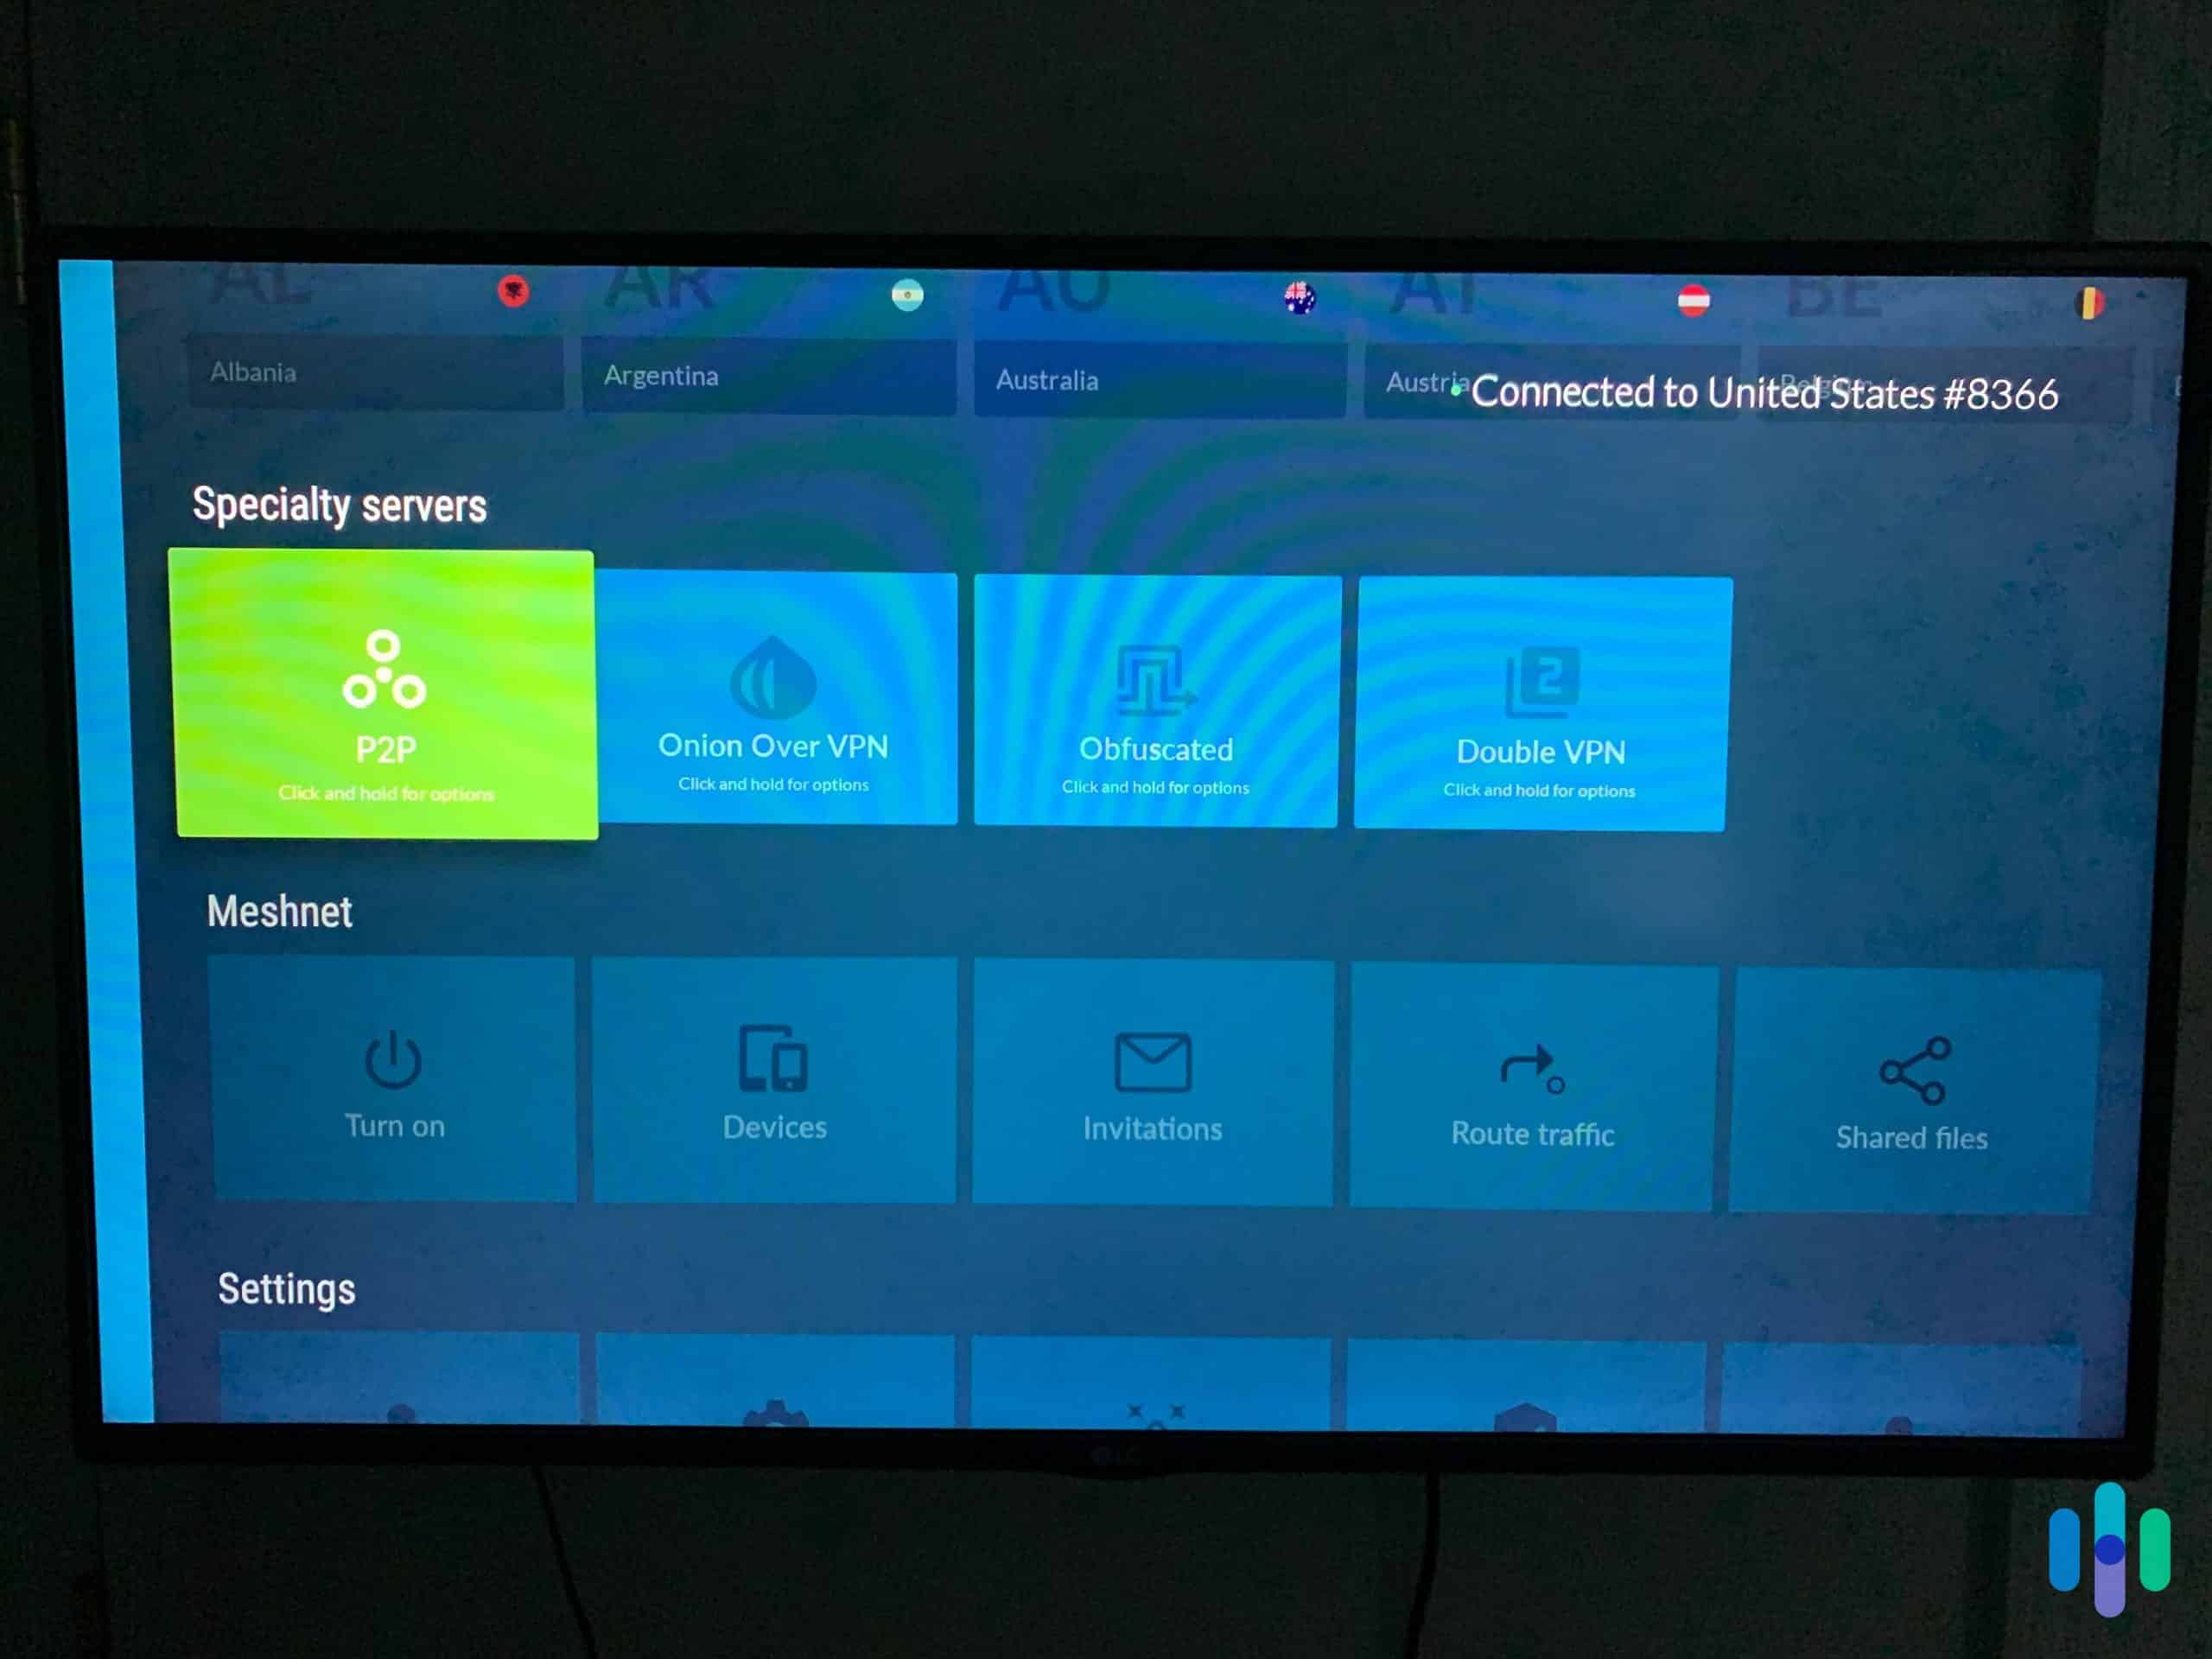 Speciality Server Options with NordVPN using the Fire TV Stick